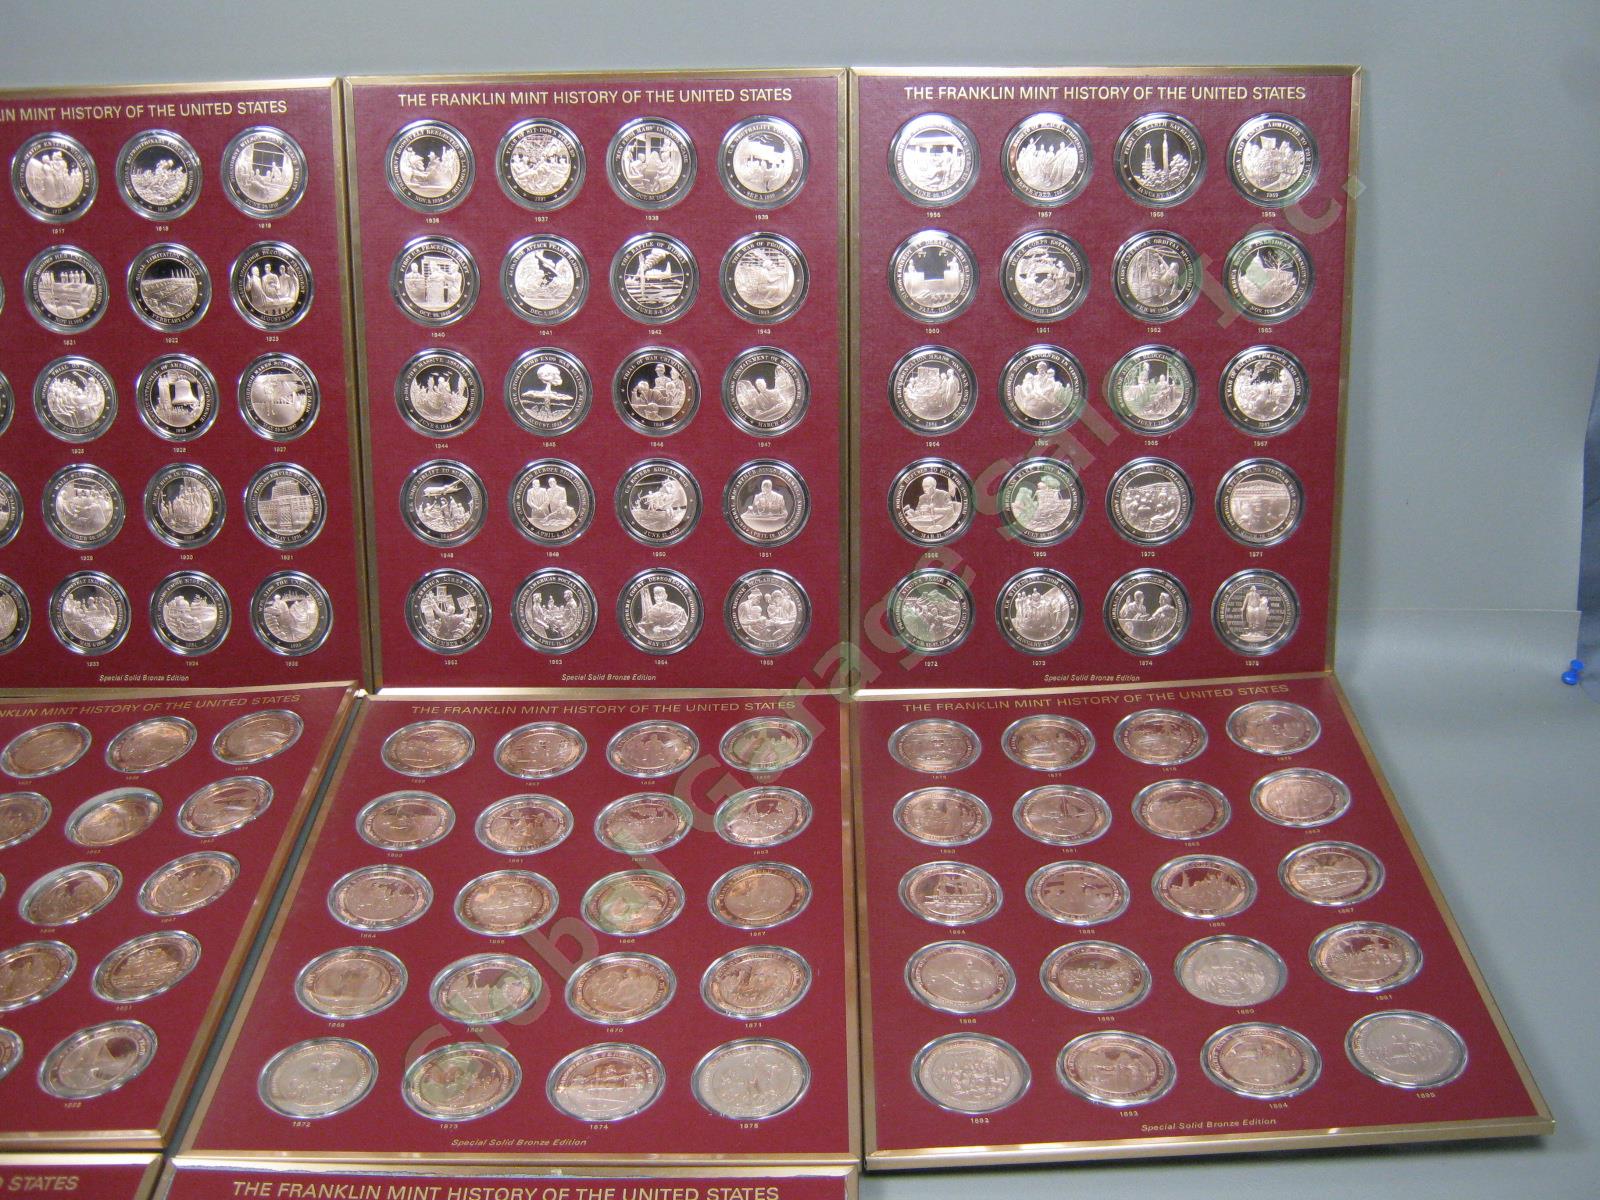 202 Franklin Mint 1776-1975 History Of The United State Solid Bronze Medal Coins 4